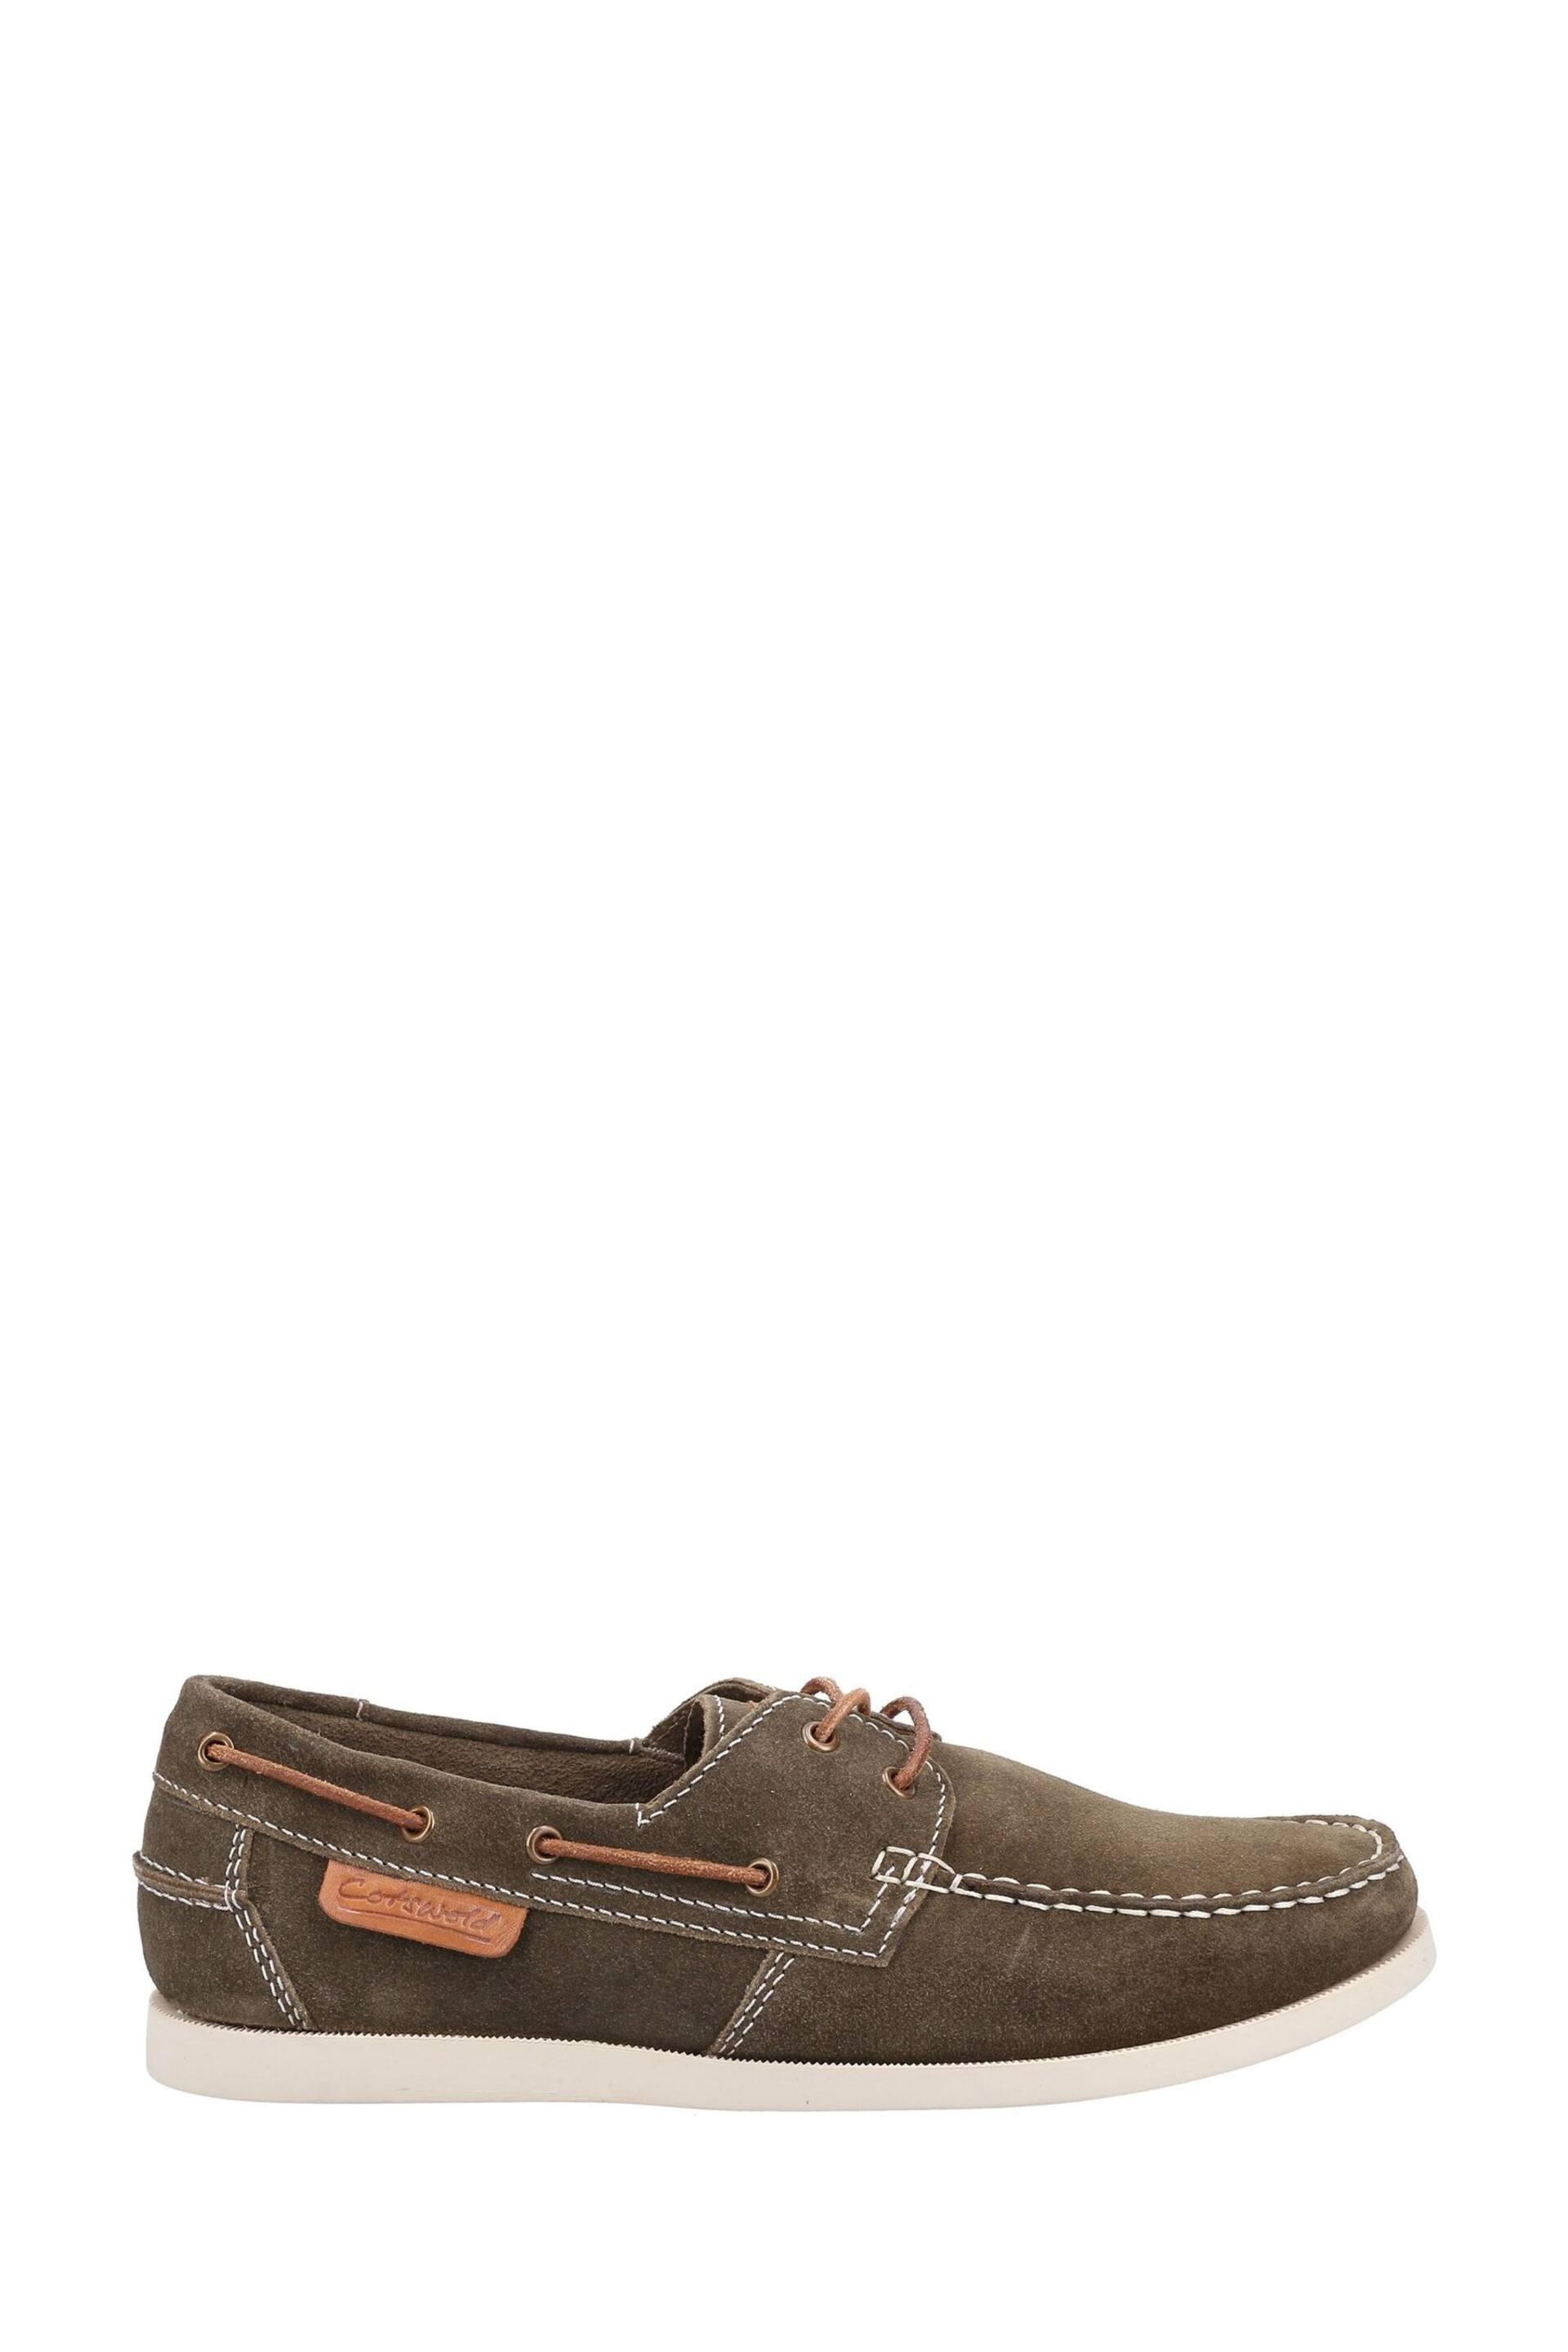 Cotswold	Green Mitcheldean Boat Shoes - Image 1 of 4